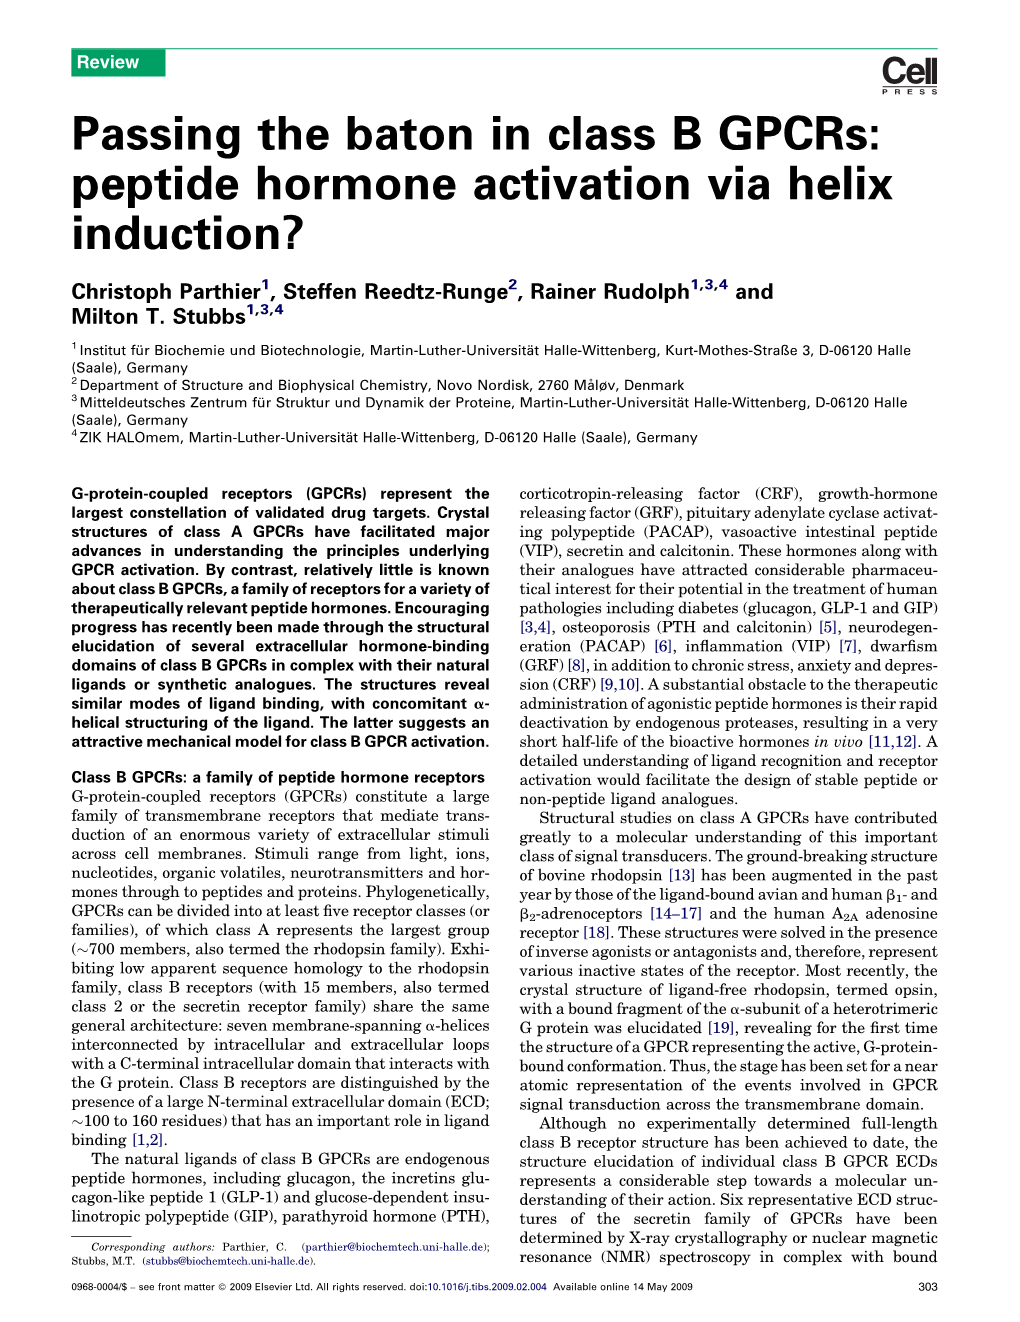 Passing the Baton in Class B Gpcrs: Peptide Hormone Activation Via Helix Induction?